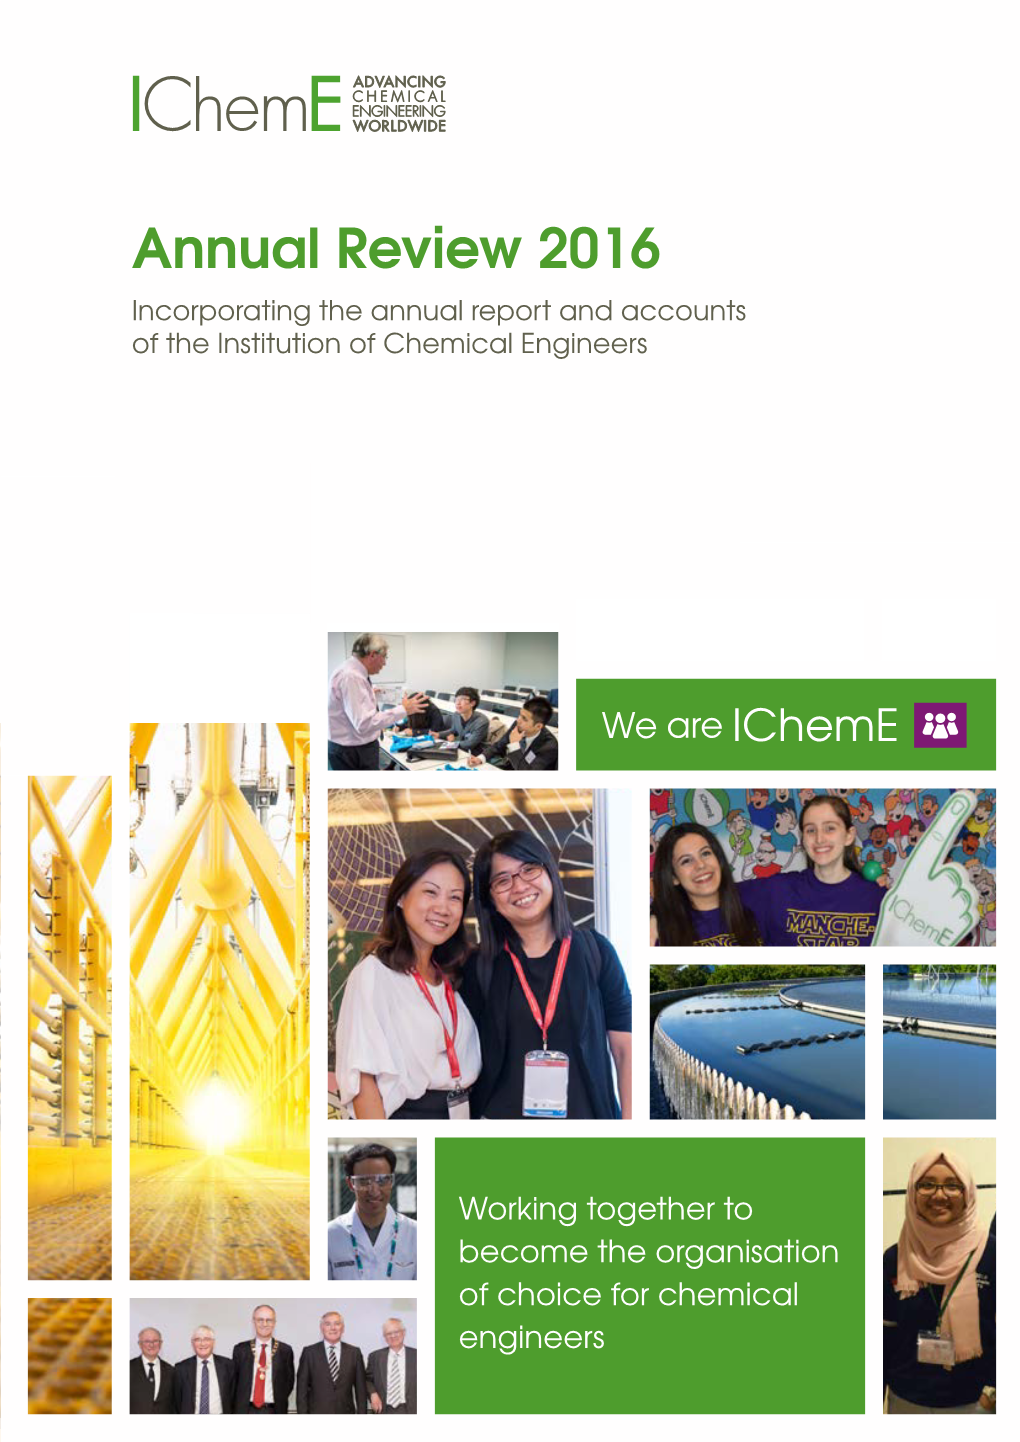 Annual Review 2016 Incorporating the Annual Report and Accounts of the Institution of Chemical Engineers